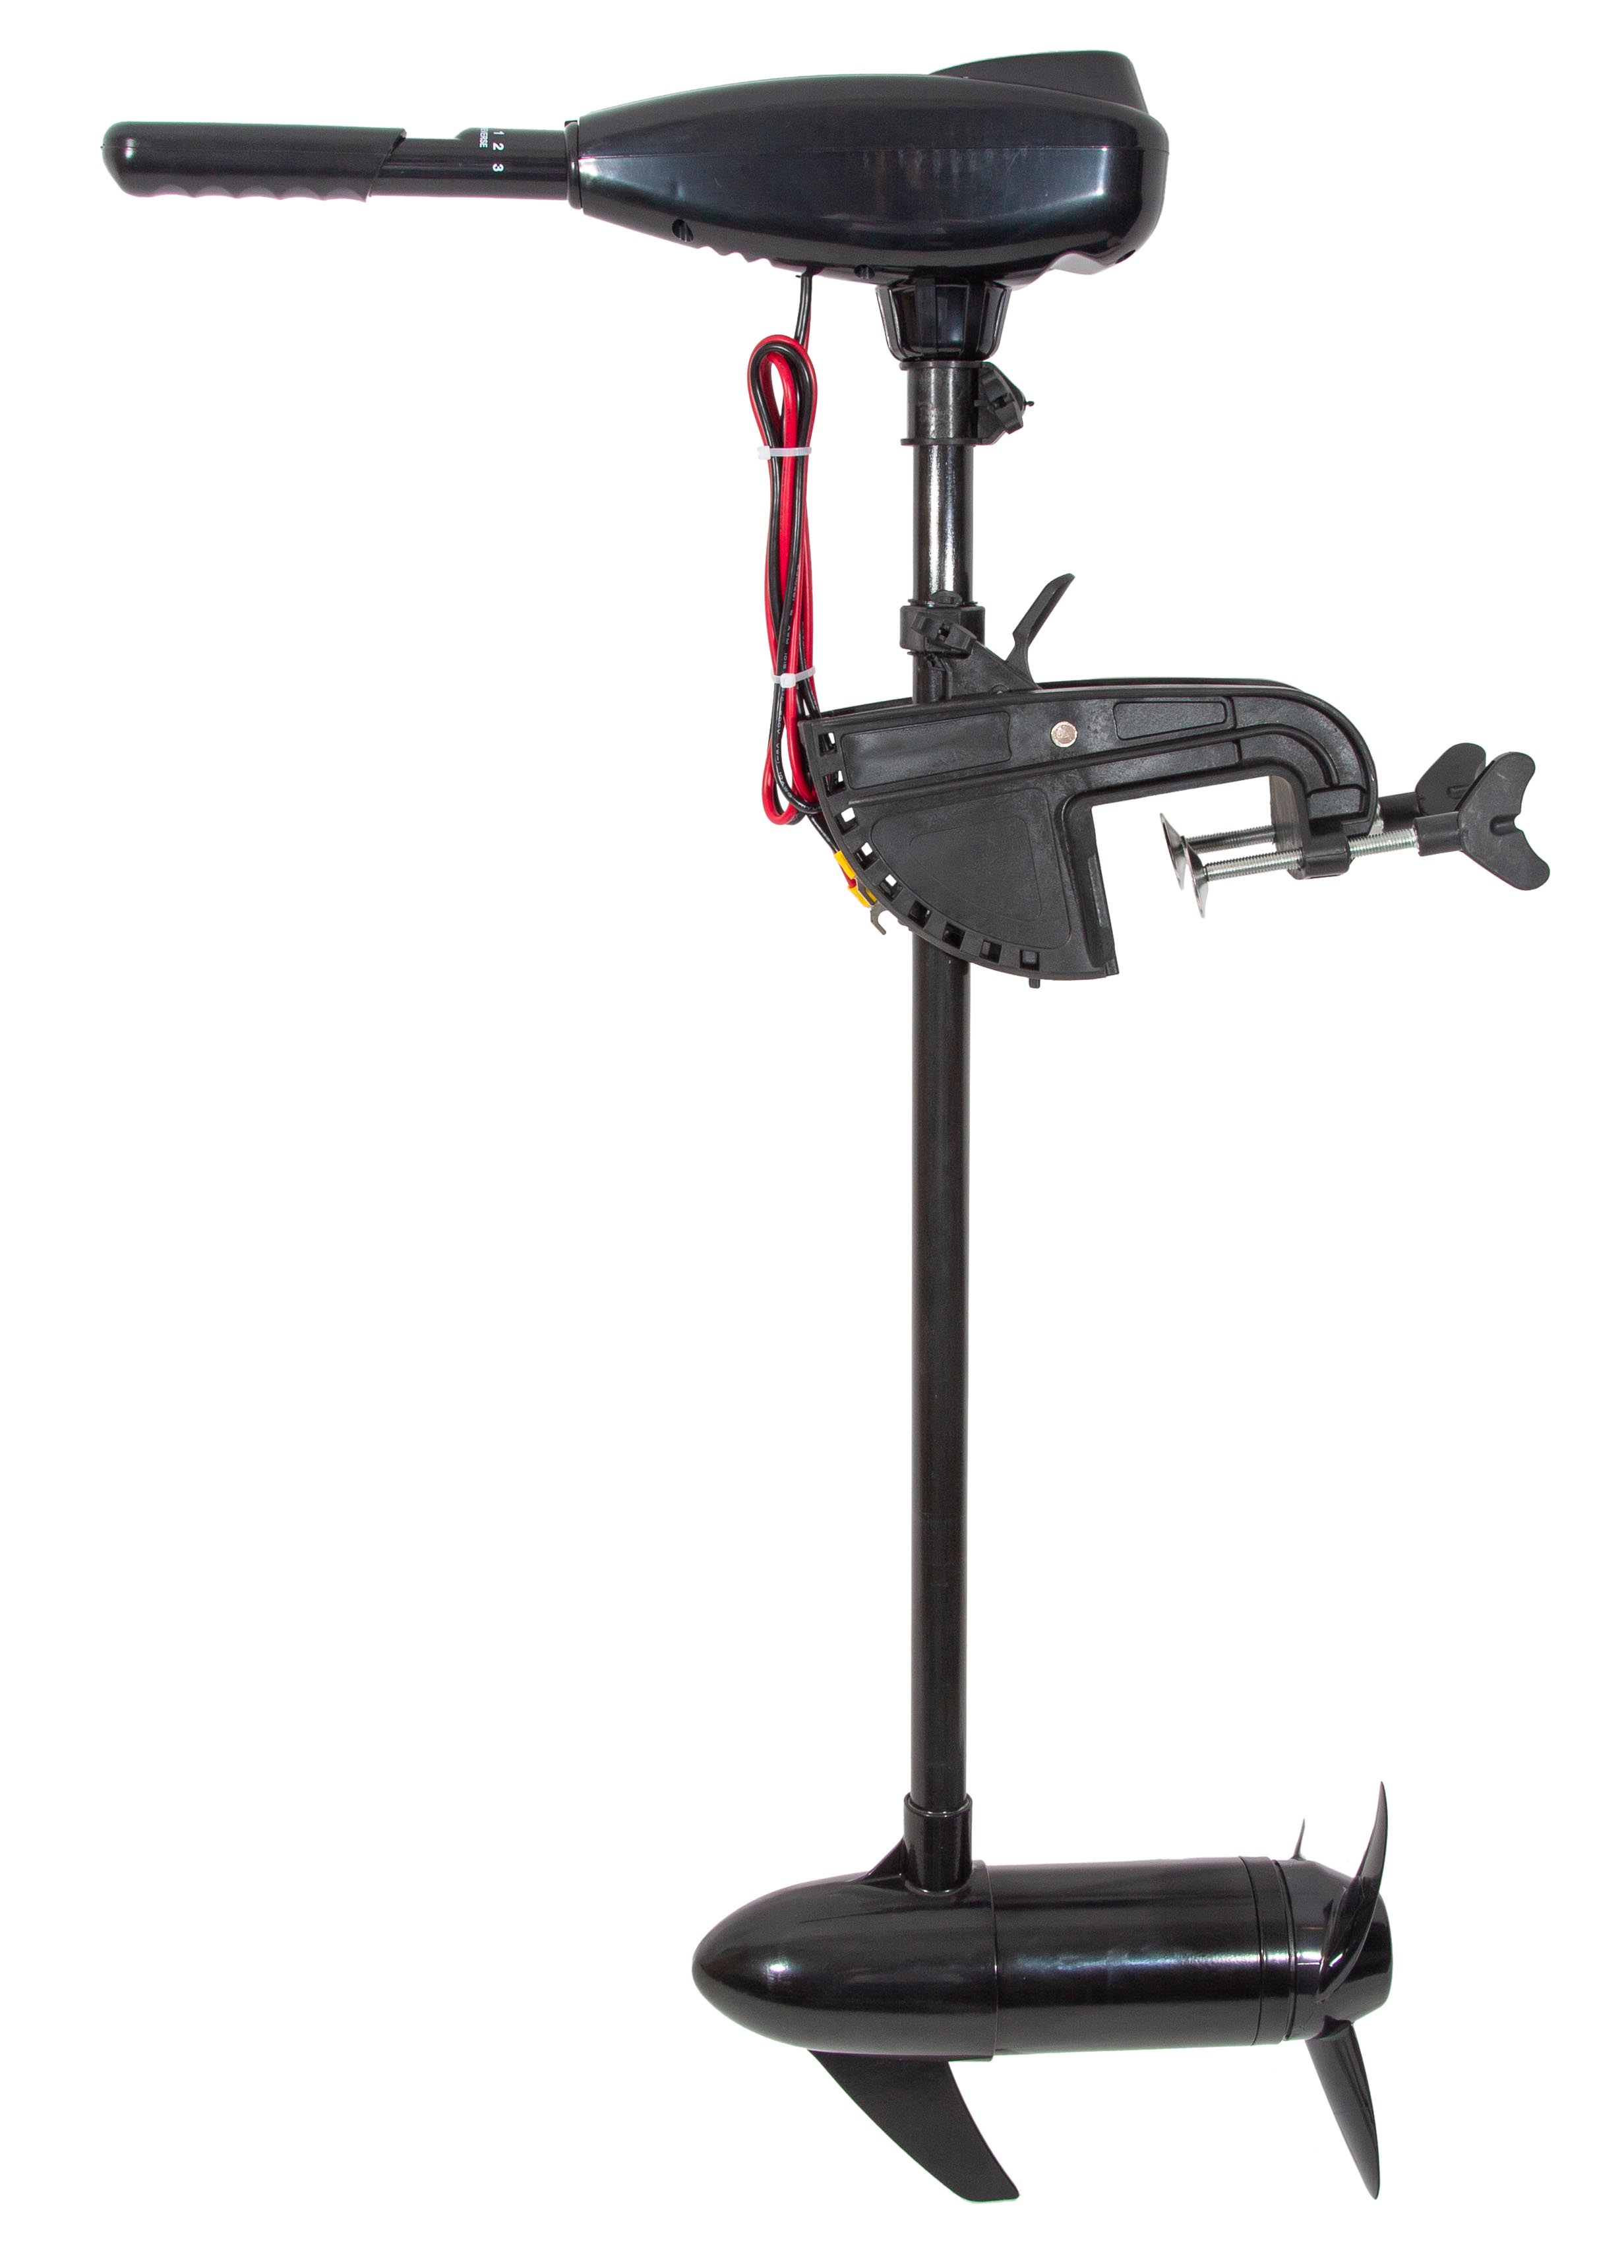 Ultimate Electric Outboard - 50lbs